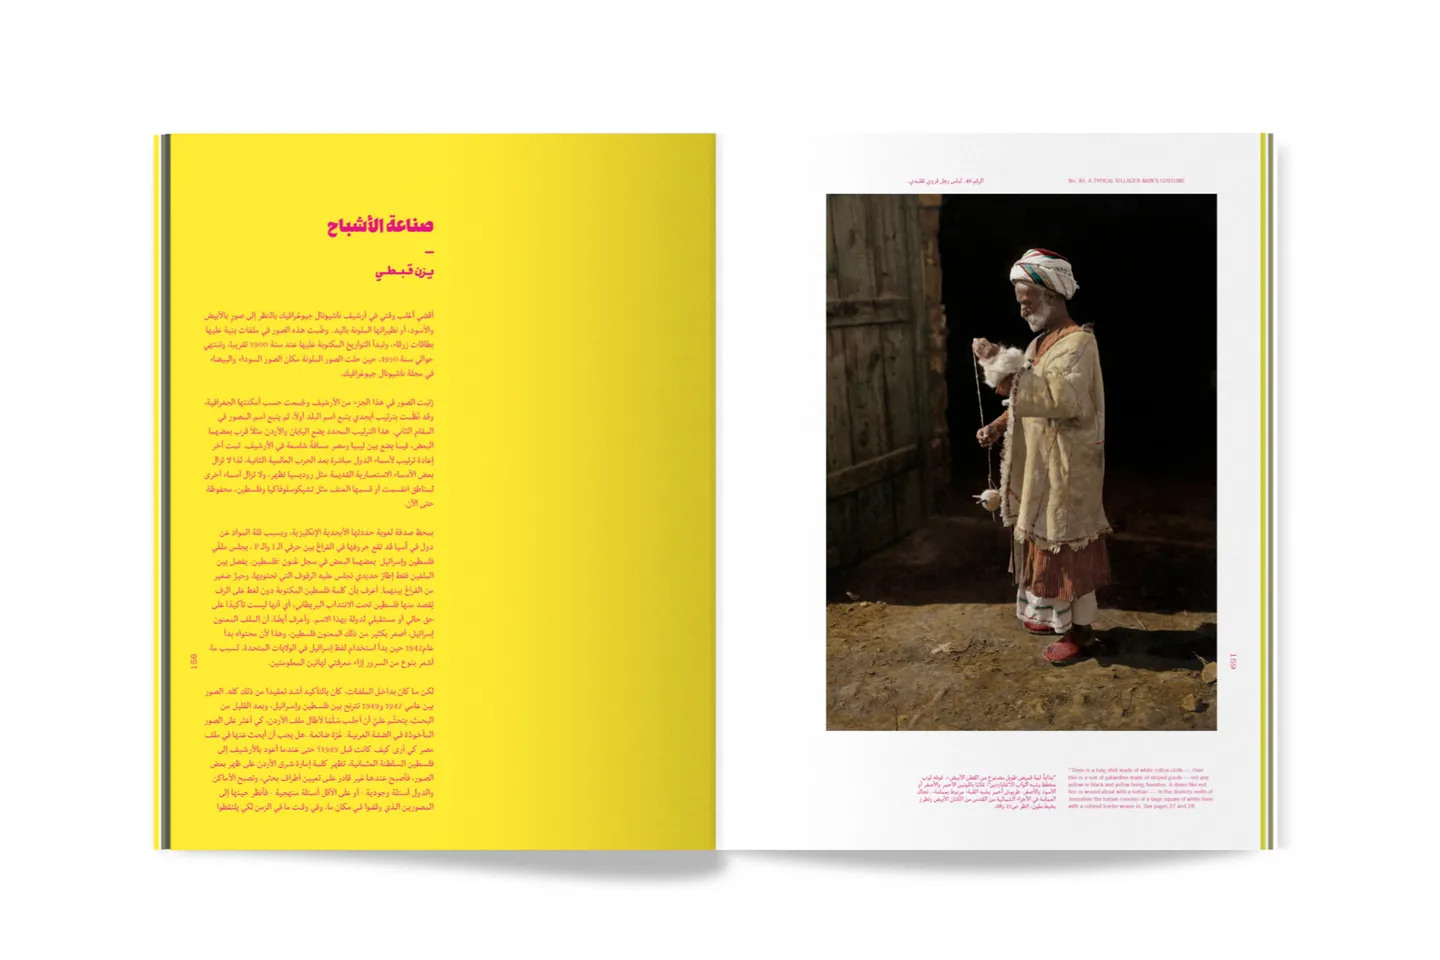 Design Publication Journal Safar Tackles The Lack Of Documentation Of Creativity In The Middle East